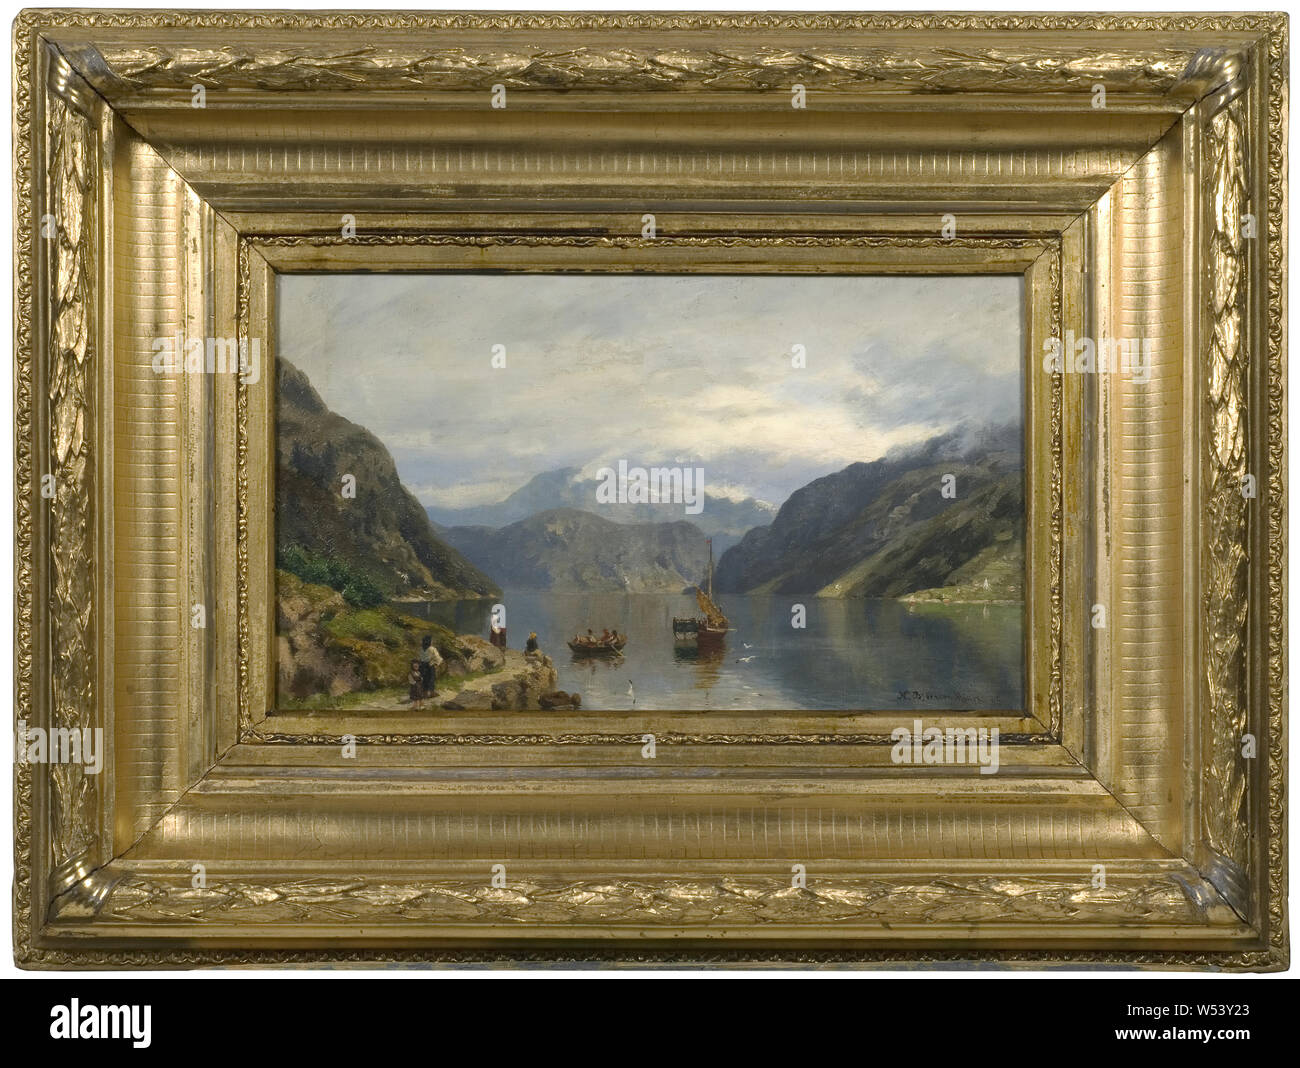 Nils Bjørnsen Møller, Fjord landscape, painting, oil on canvas, Height, 24.4 cm (9.6 inches), Width, 40.8 cm (16 inches) Stock Photo